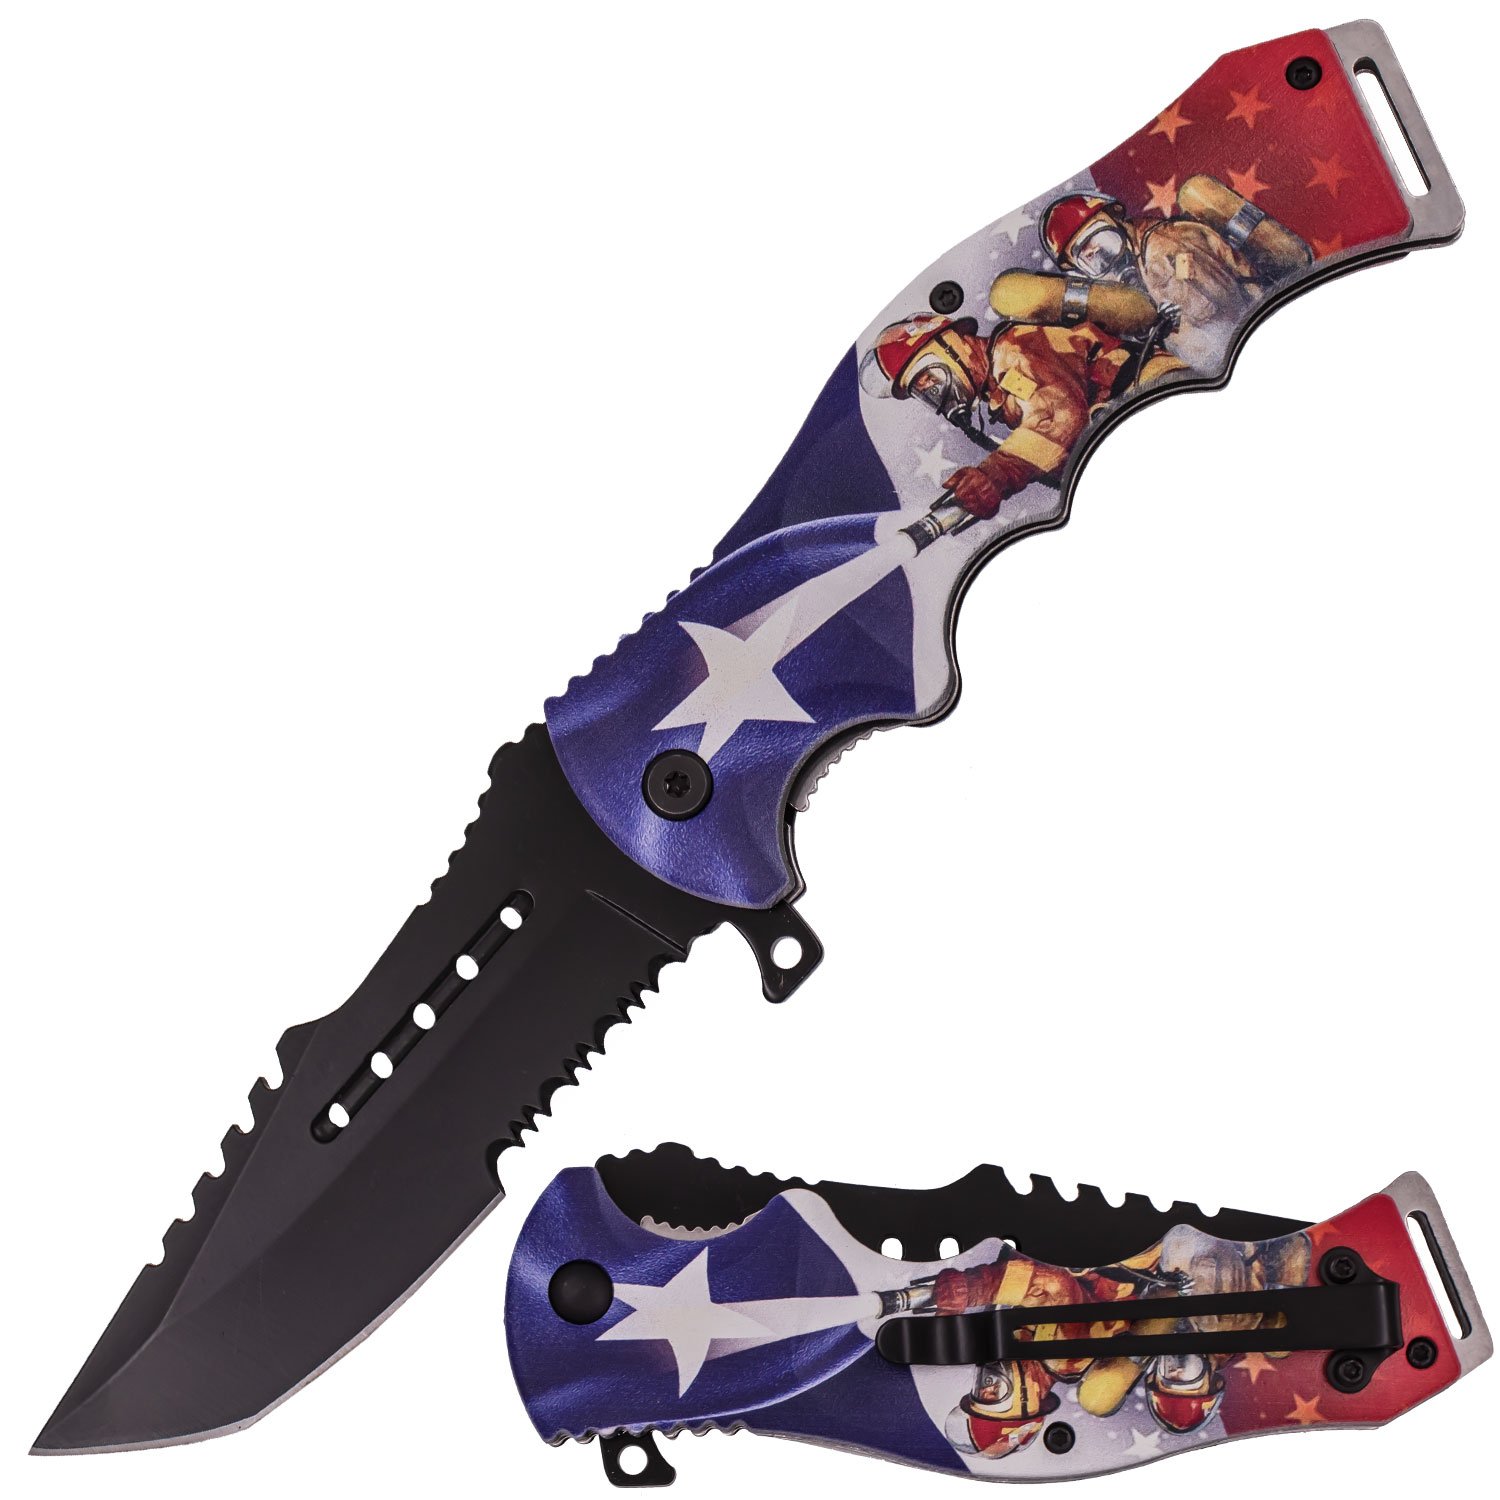 Spring-Assist Folding KnifeDuck 3.5" Black Blade Red Silver Flames EDC 